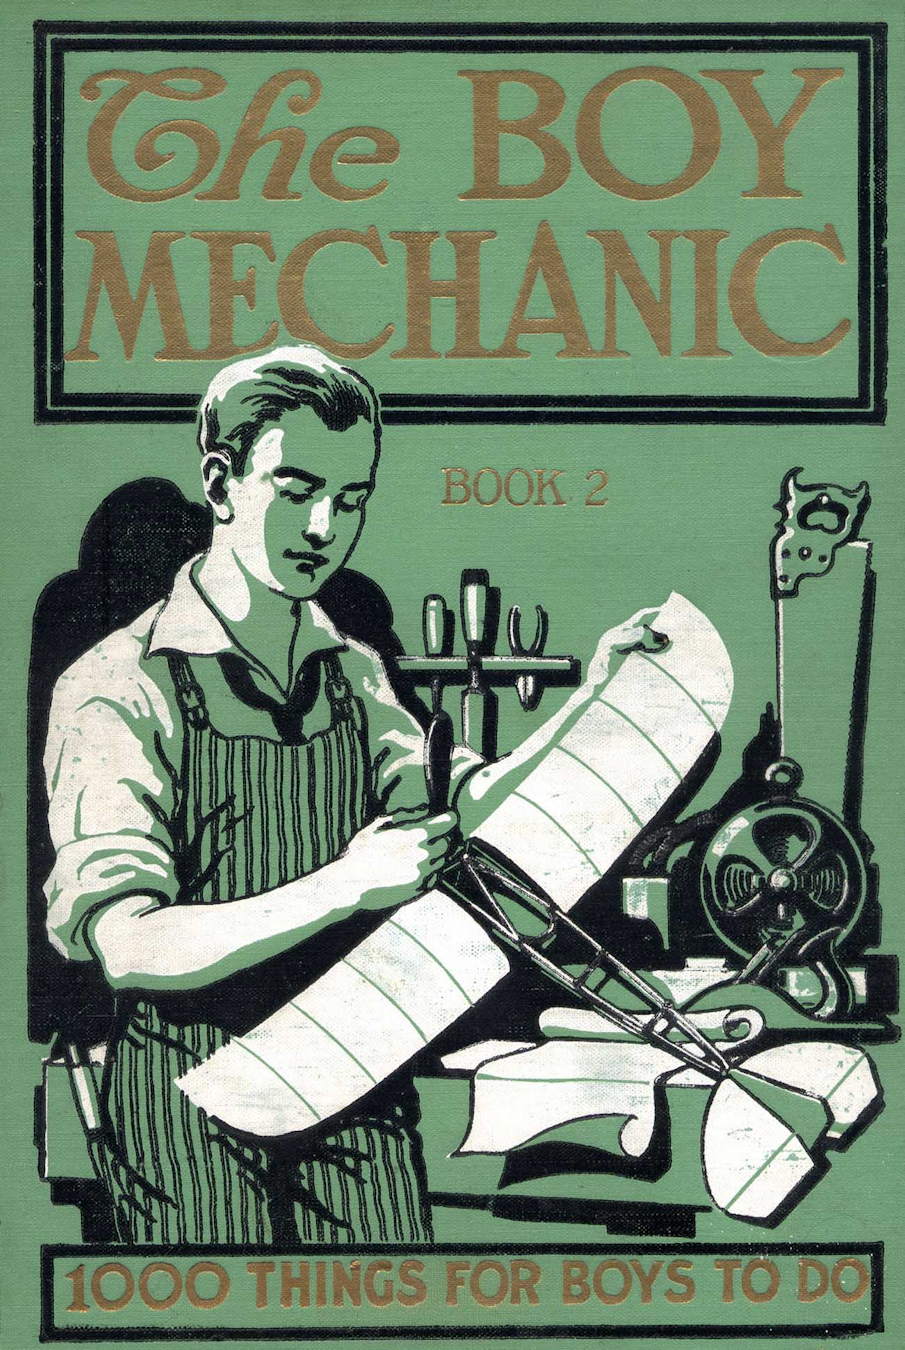 The Project Gutenberg eBook of The Boy Mechanic Book 2 by H. H.